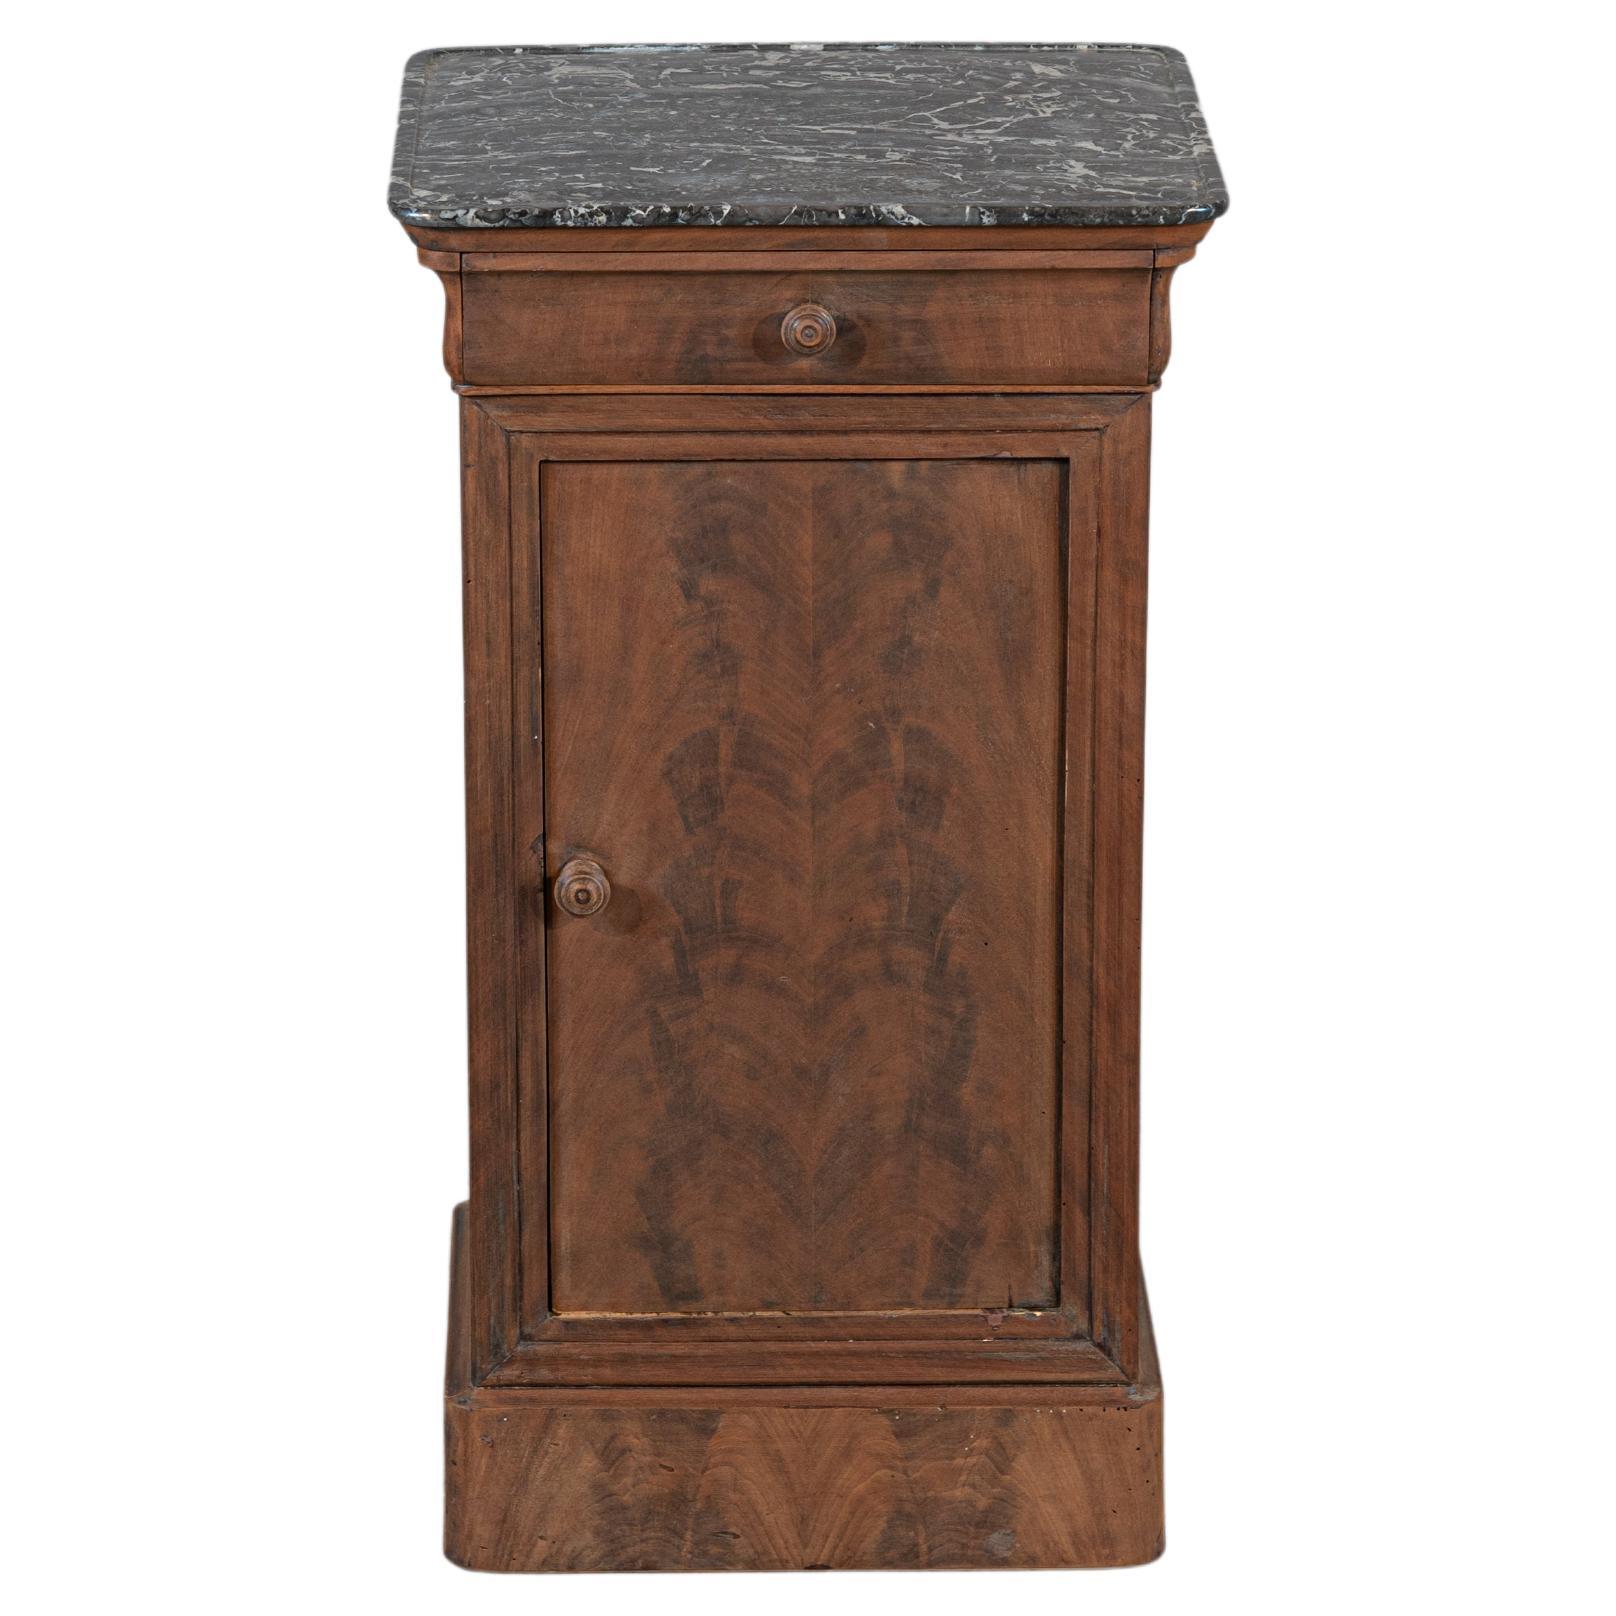 Home Square 2 Piece Louis Philippe III Wood Nightstand Set in Cherry, 1 -  Baker's